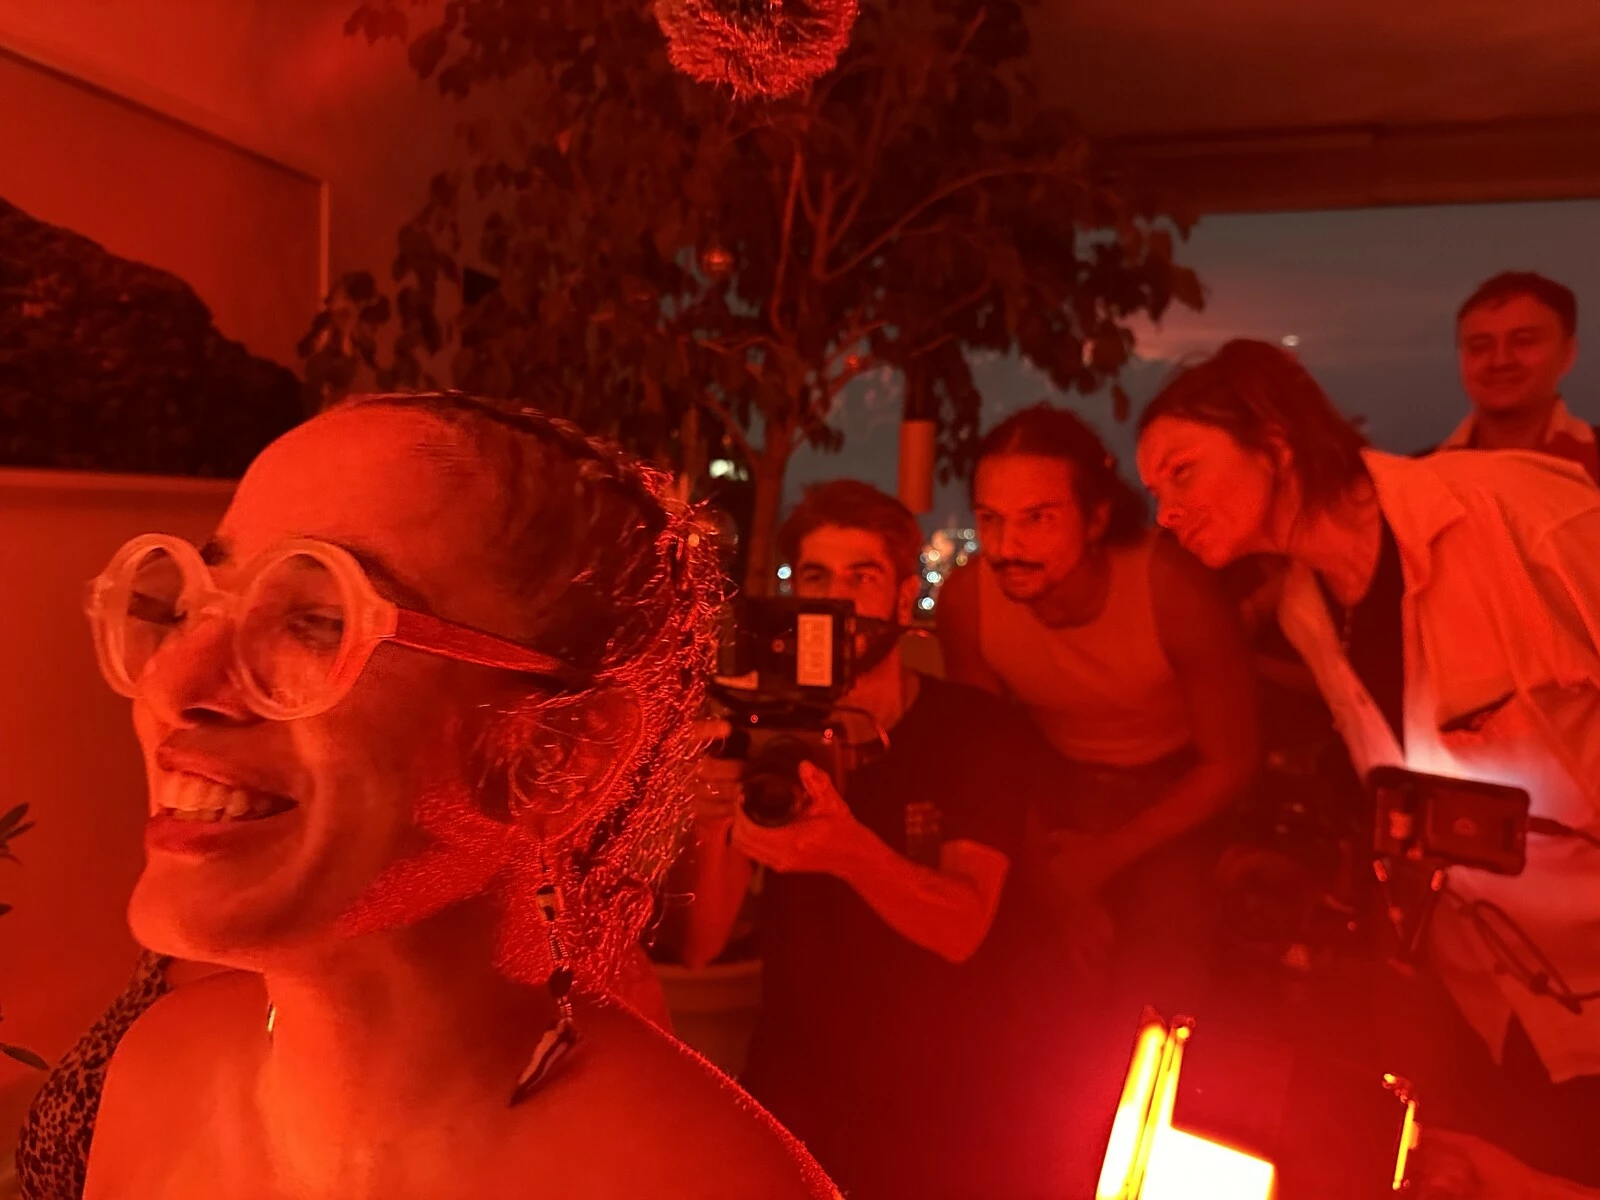 A red-tinged image of a smiling person wearing glasses in the foreground with a group of four people behind them looking at the small screen of a video camera.